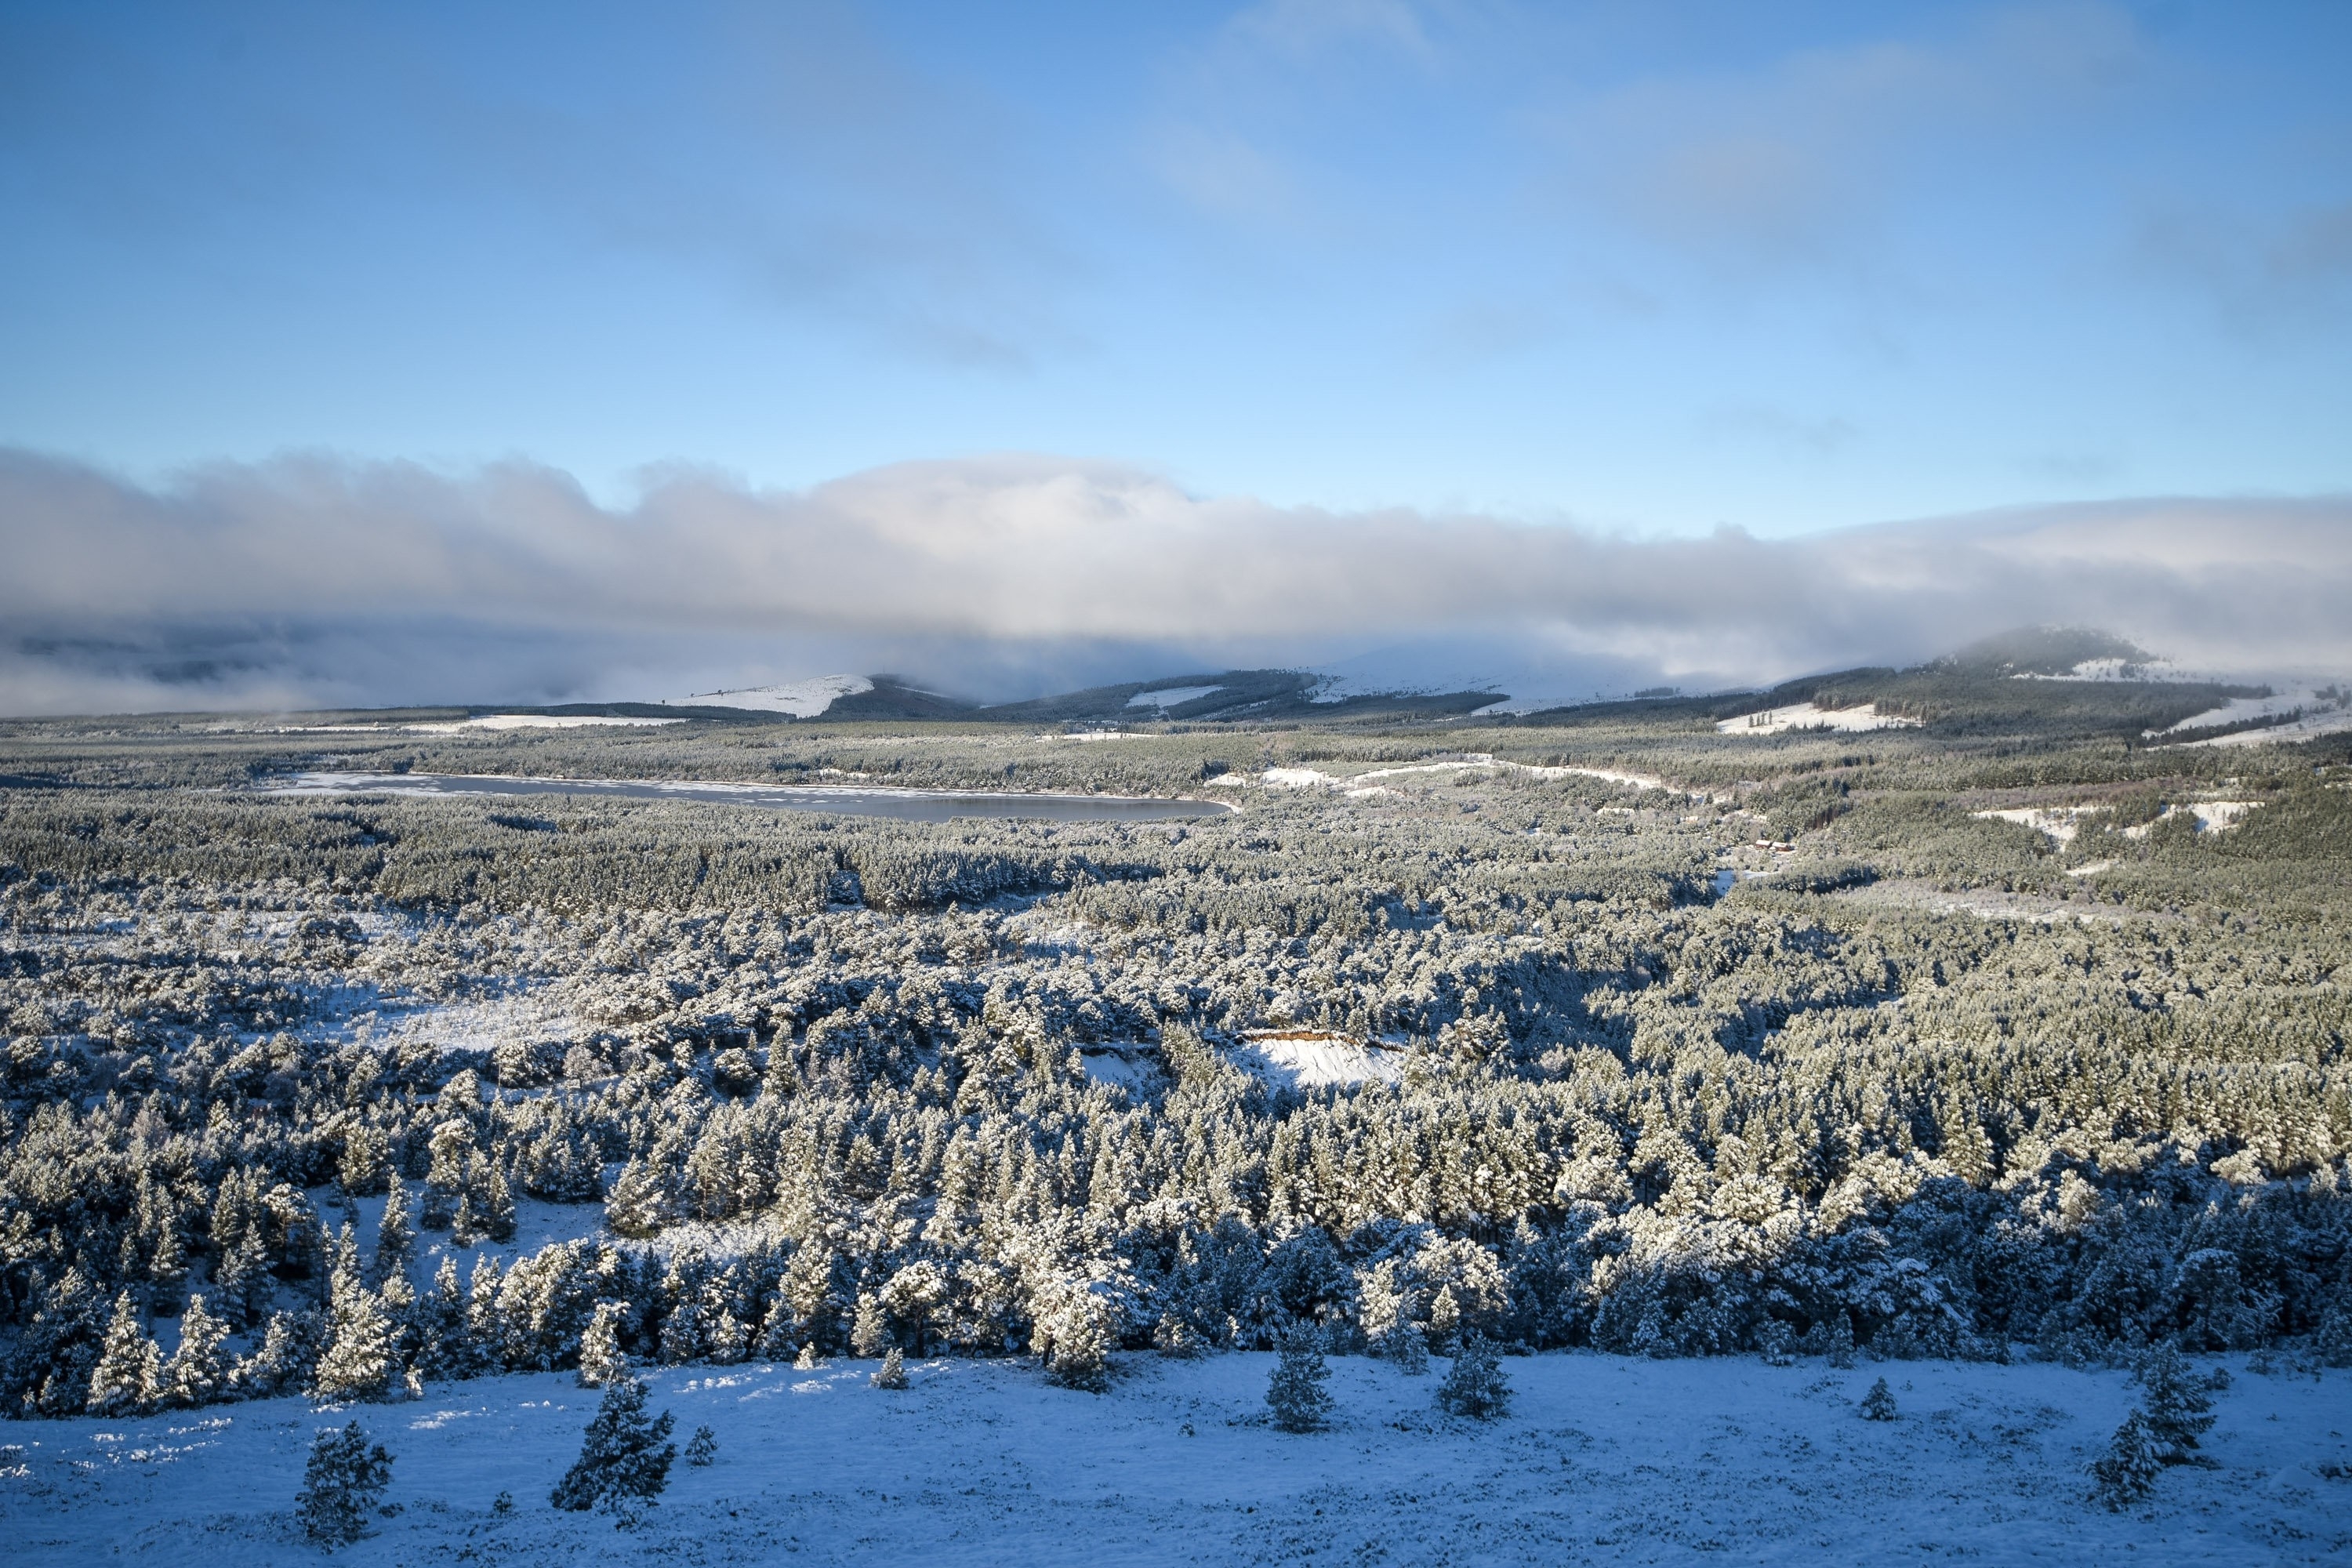 Schools across the Highlands are closed today. A past image of a snowy Aviemore